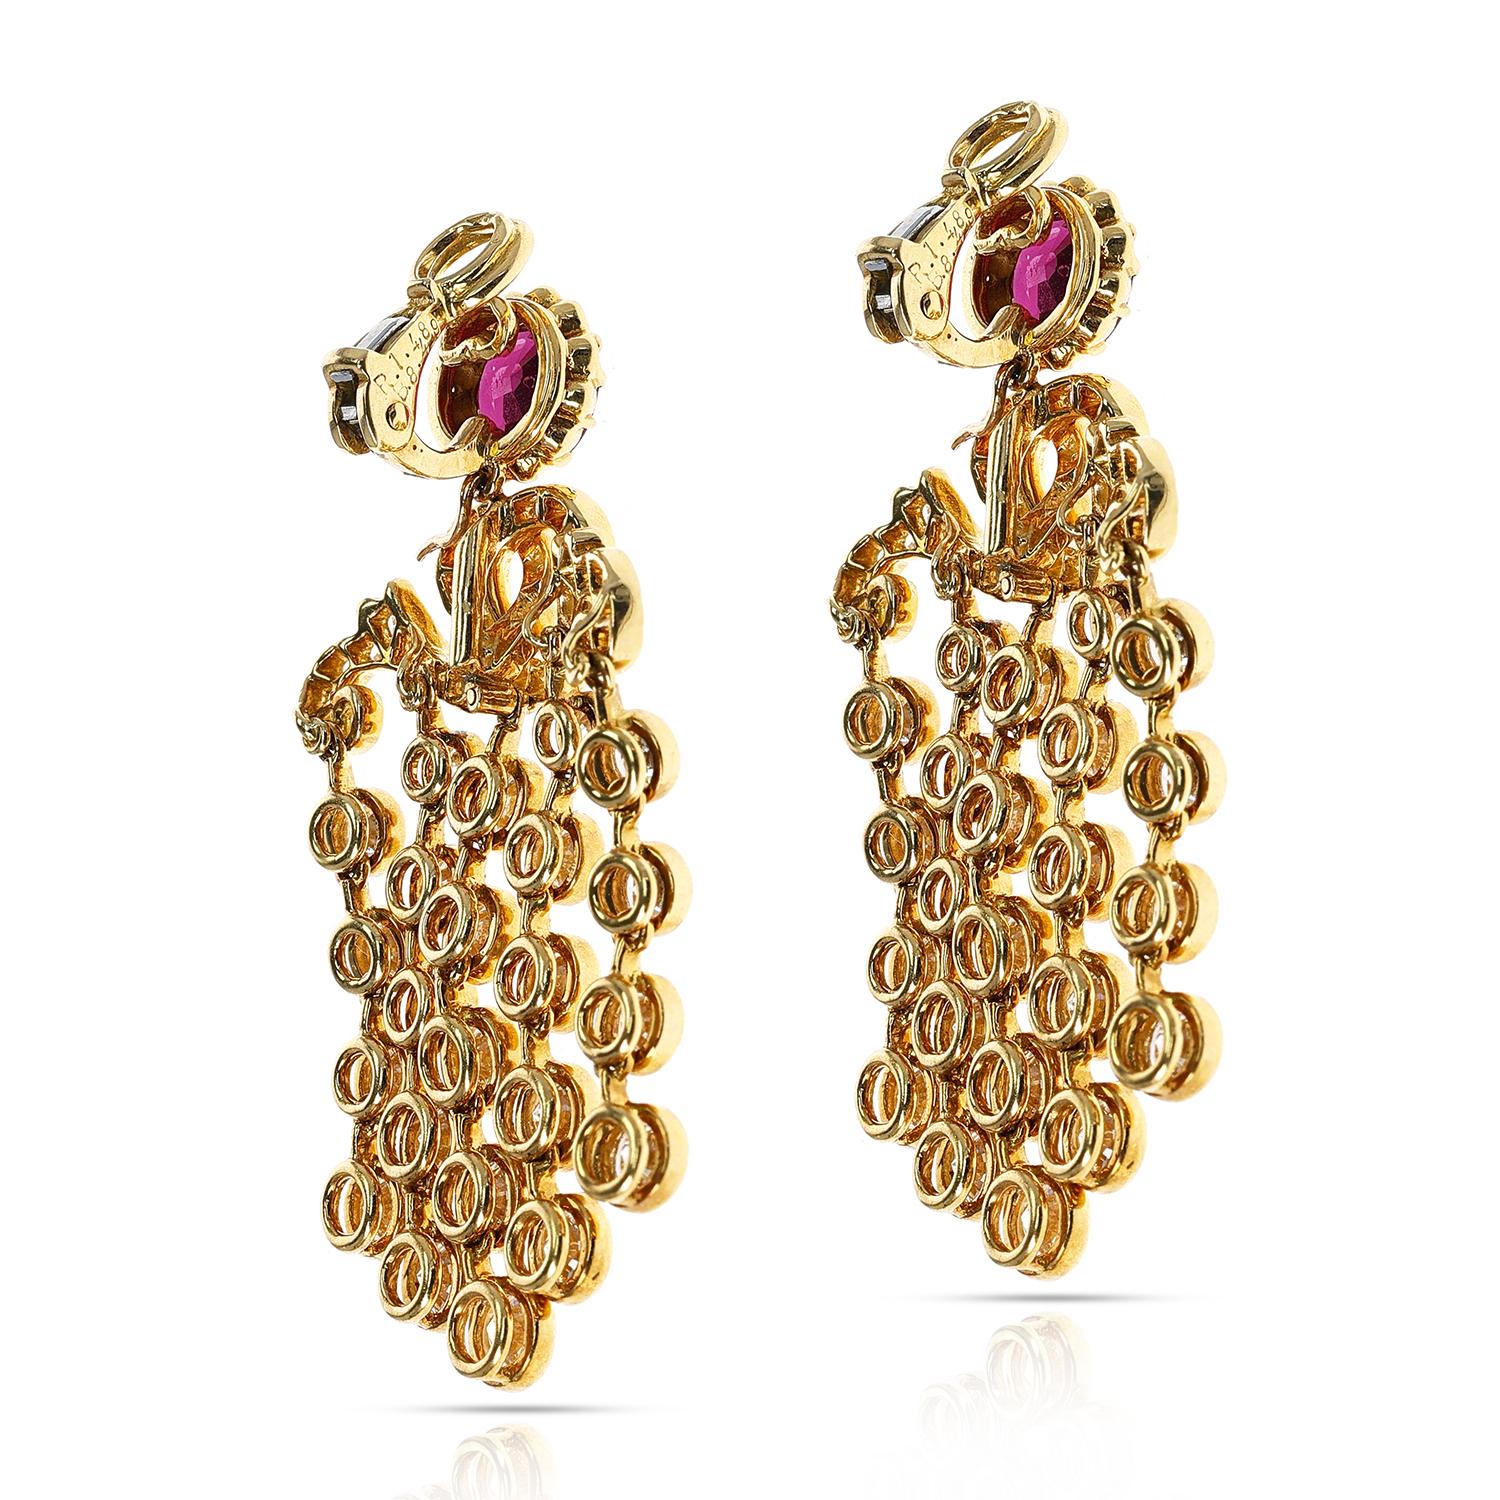 A stunning pair of French Alexandre Reza Ruby and Diamond Cocktail Dangling Earrings made in 18K Gold. The total weight of the rubies are 3.01 carats and the total diamond weight is 8.49 carats. The total weight of the earrings is 23.10 grams. The